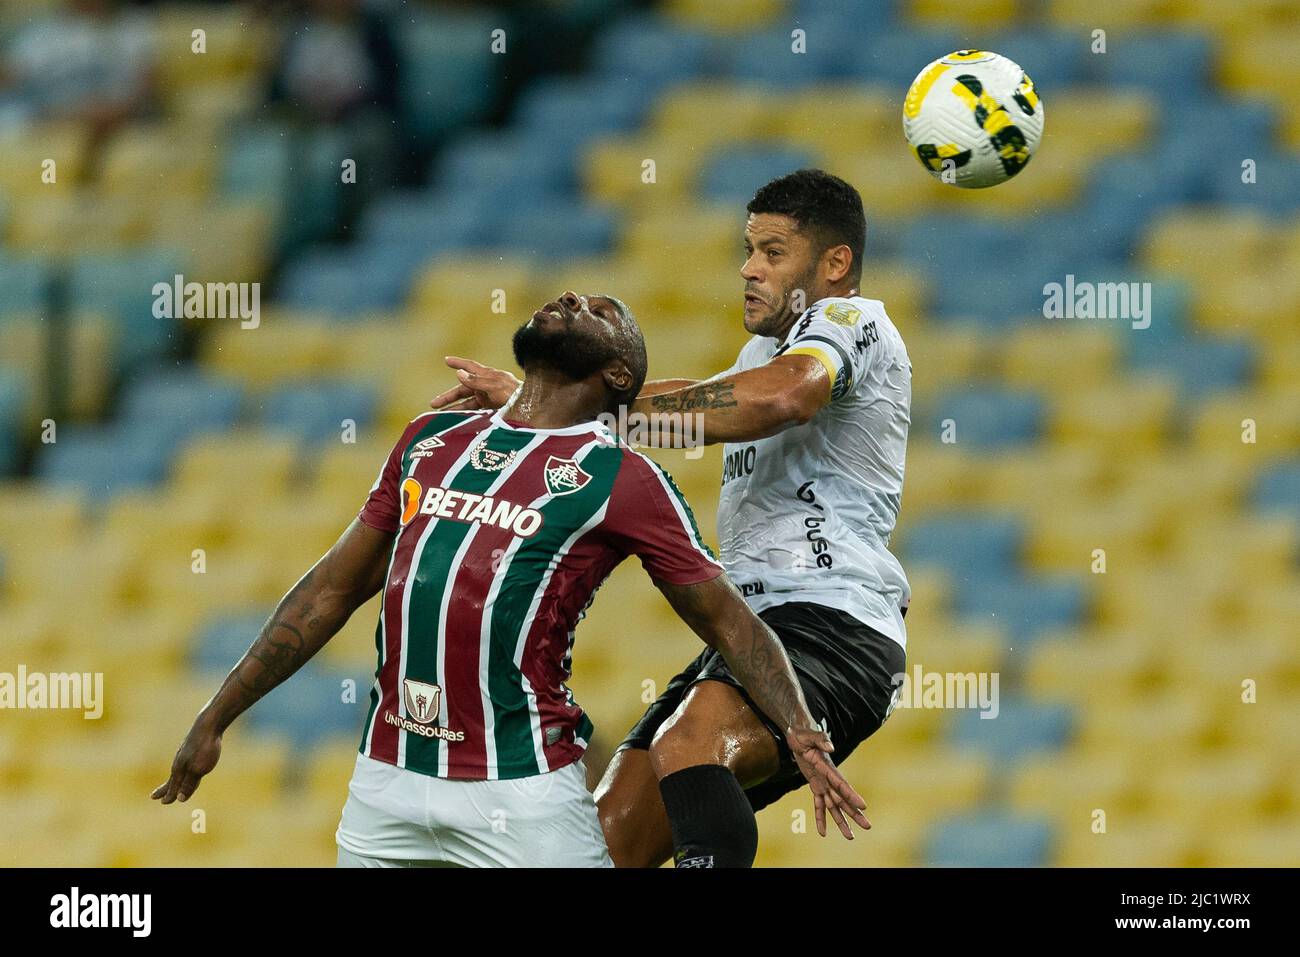 Rio De Janeiro, Brazil. 08th June, 2022. Hulk of Atletico-MG during the match between Fluminense and Atletico-MG as part of Brasileirao Serie A 2022 at Maracana Stadium on June 08, 2022 in Rio de Janeiro, Brazil. This game is valid for the third of thirty-eight rounds of the Brasileirao Serie A 2022. (Photo by Ruano Carneiro/Carneiro Images/Sipa USA) Credit: Sipa USA/Alamy Live News Stock Photo